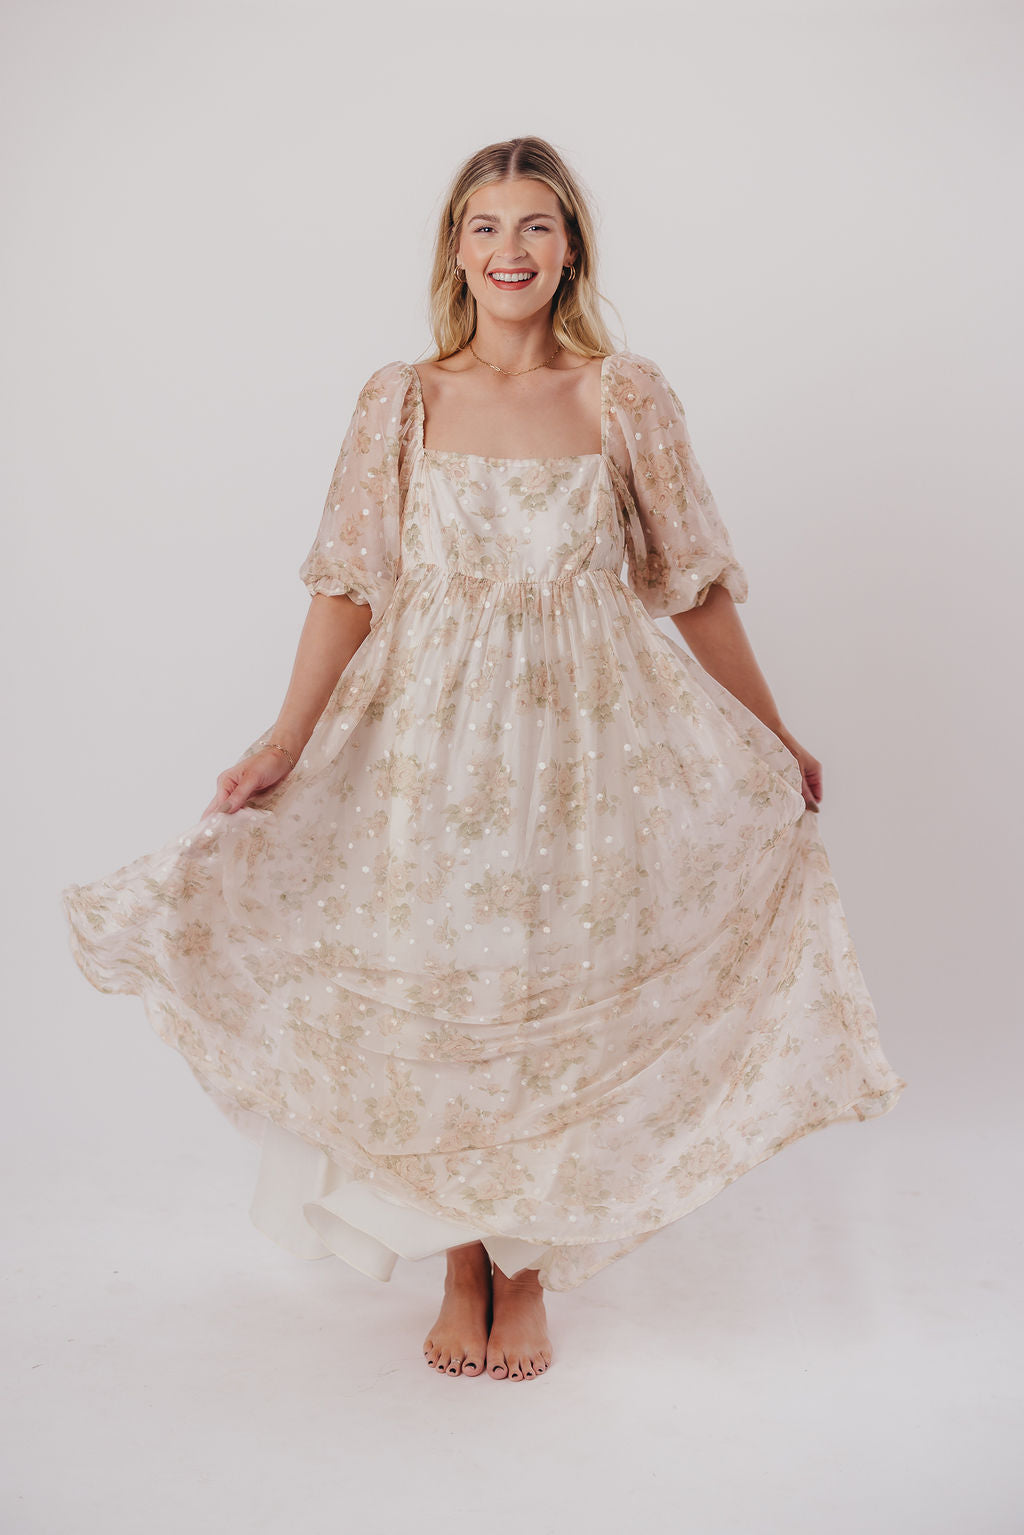 Mona Maxi Dress with Smocking in Cream Floral - Bump Friendly & Inclusive Sizing (S-3XL)